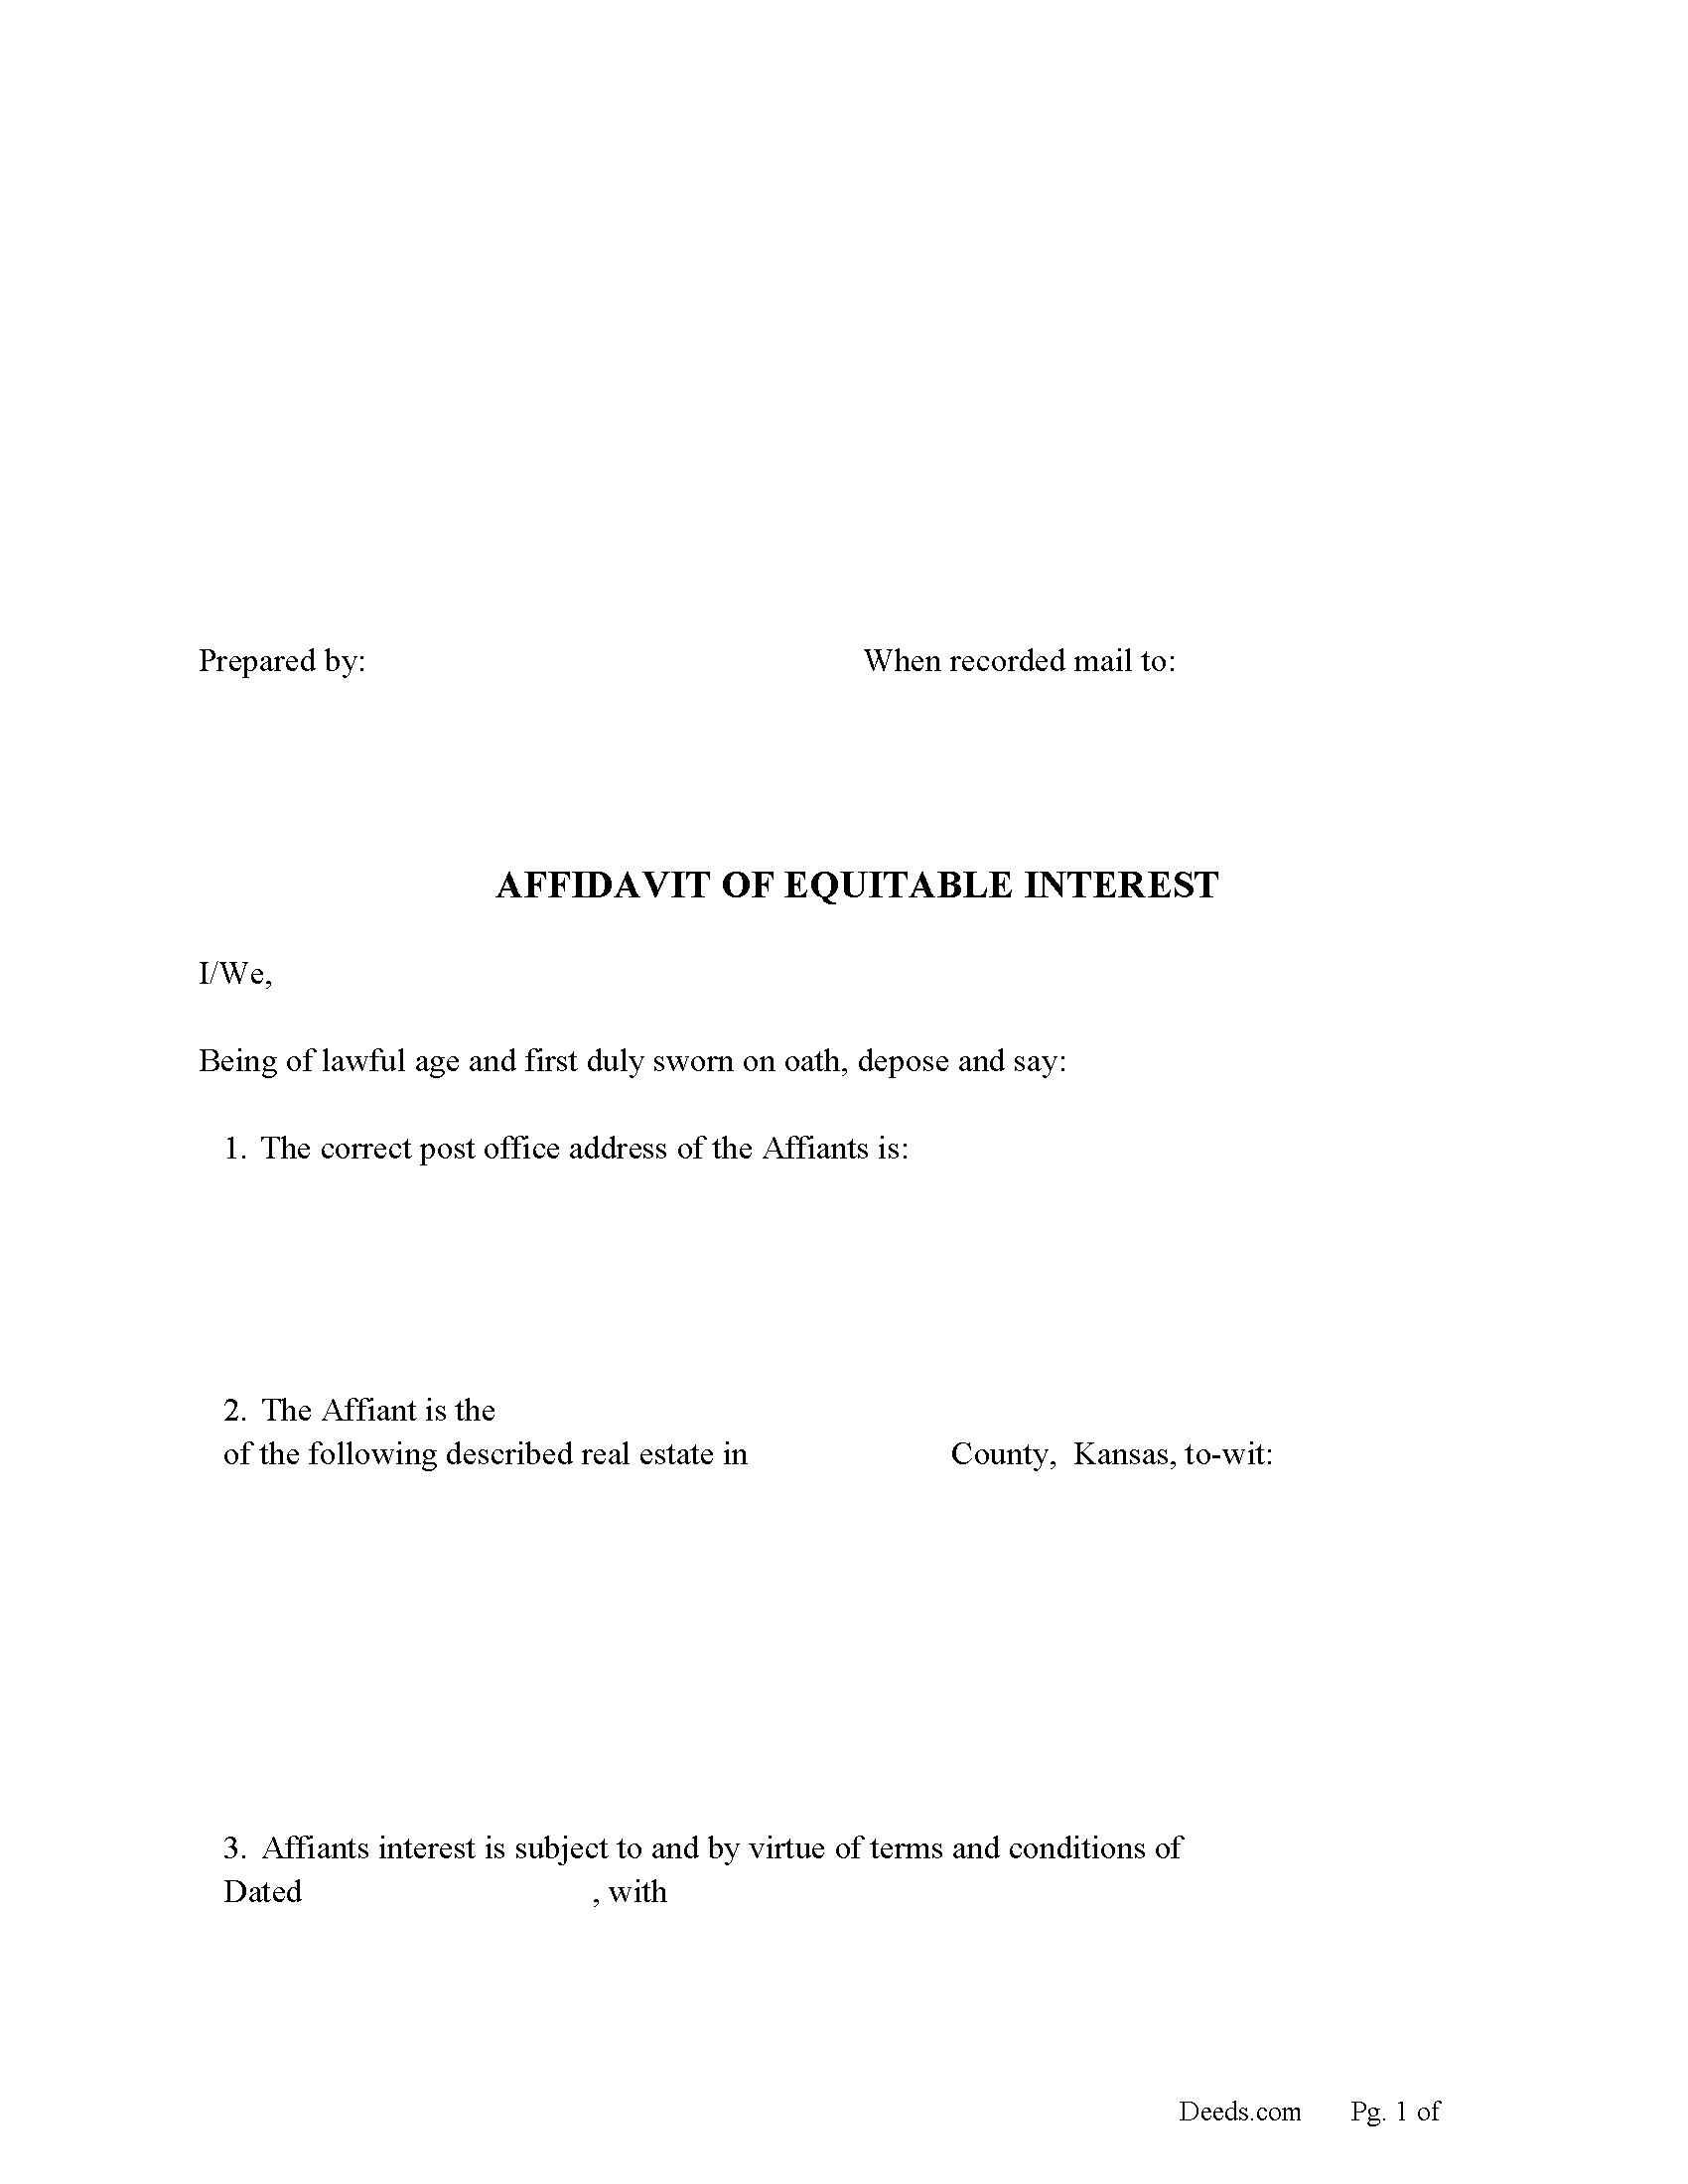 Clay County Affidavit for Equitable Interest Form